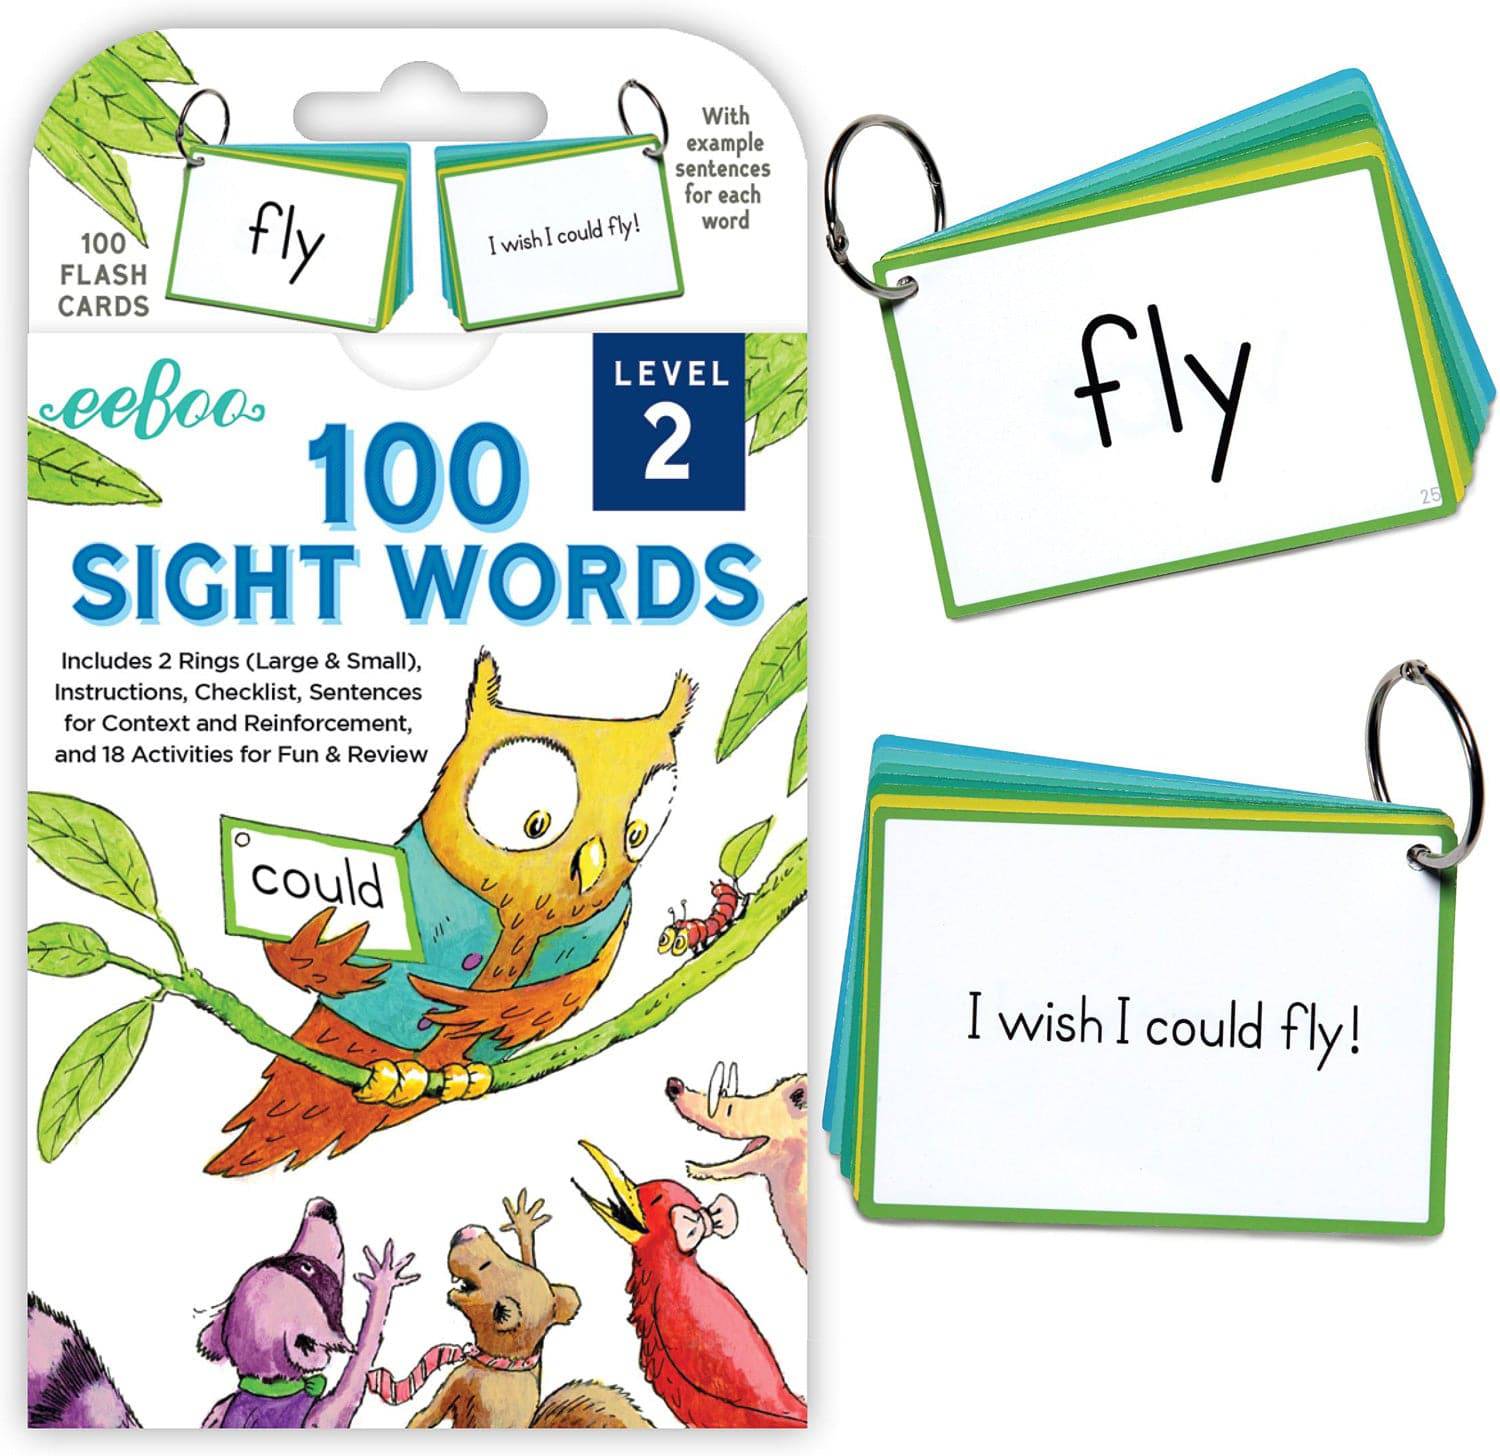 FLSW2 100 SIGHT WORDS LEVEL 2 - A Child's Delight